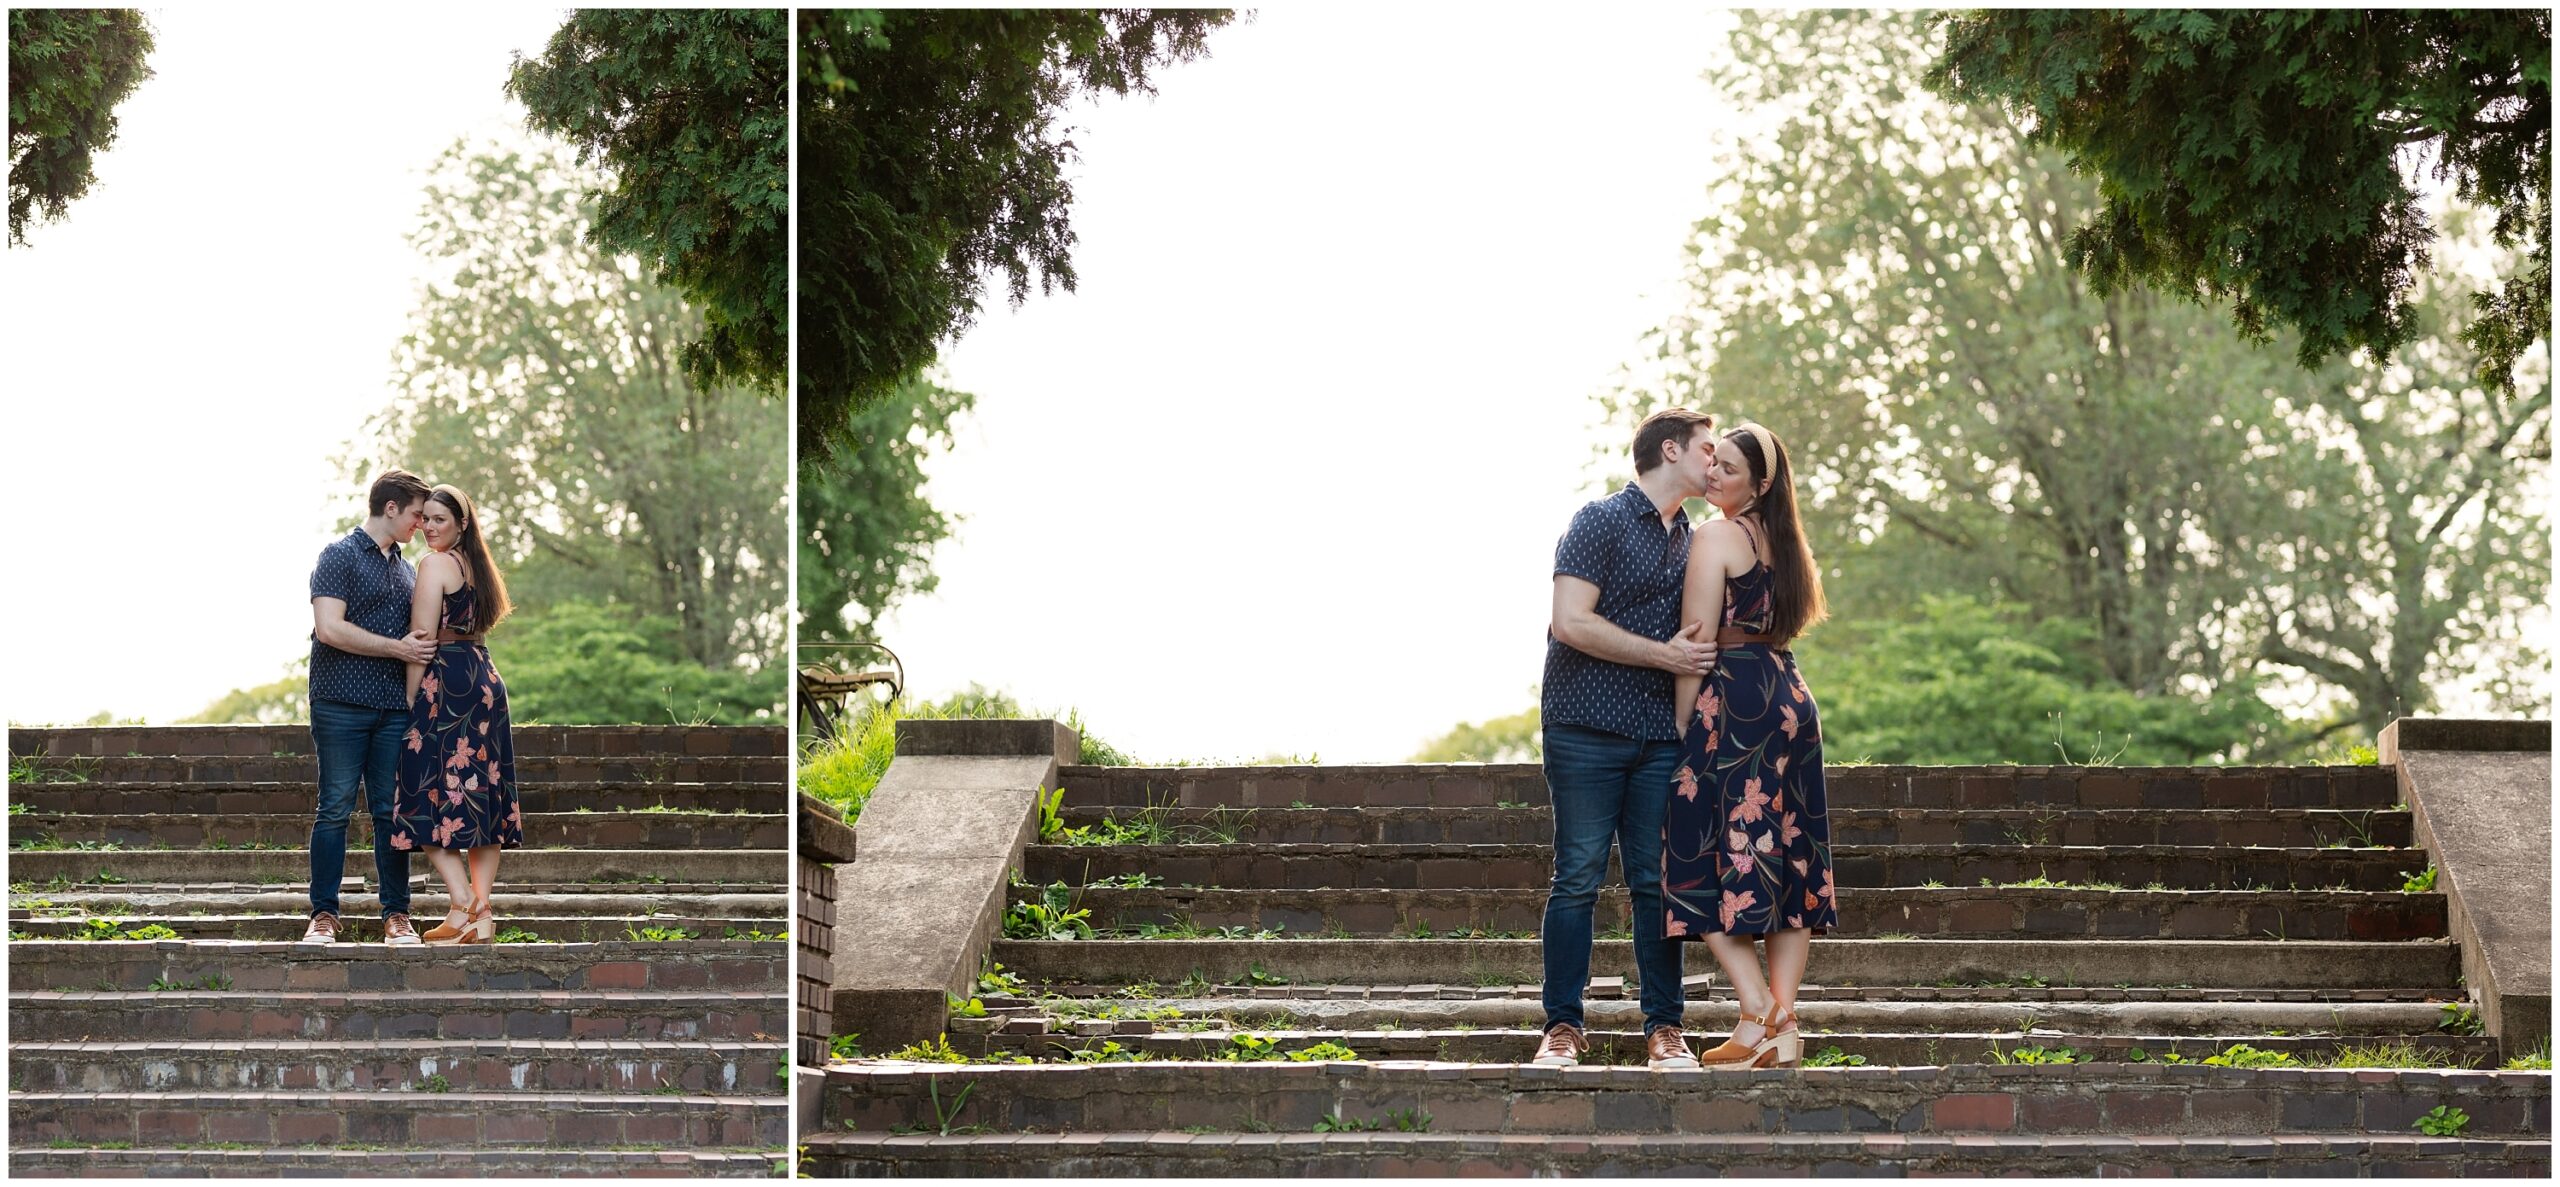 Mellon Park Engagement Session in Pittsburgh, PA photographed by Pittsburgh Wedding Photographer Acevedo Weddings